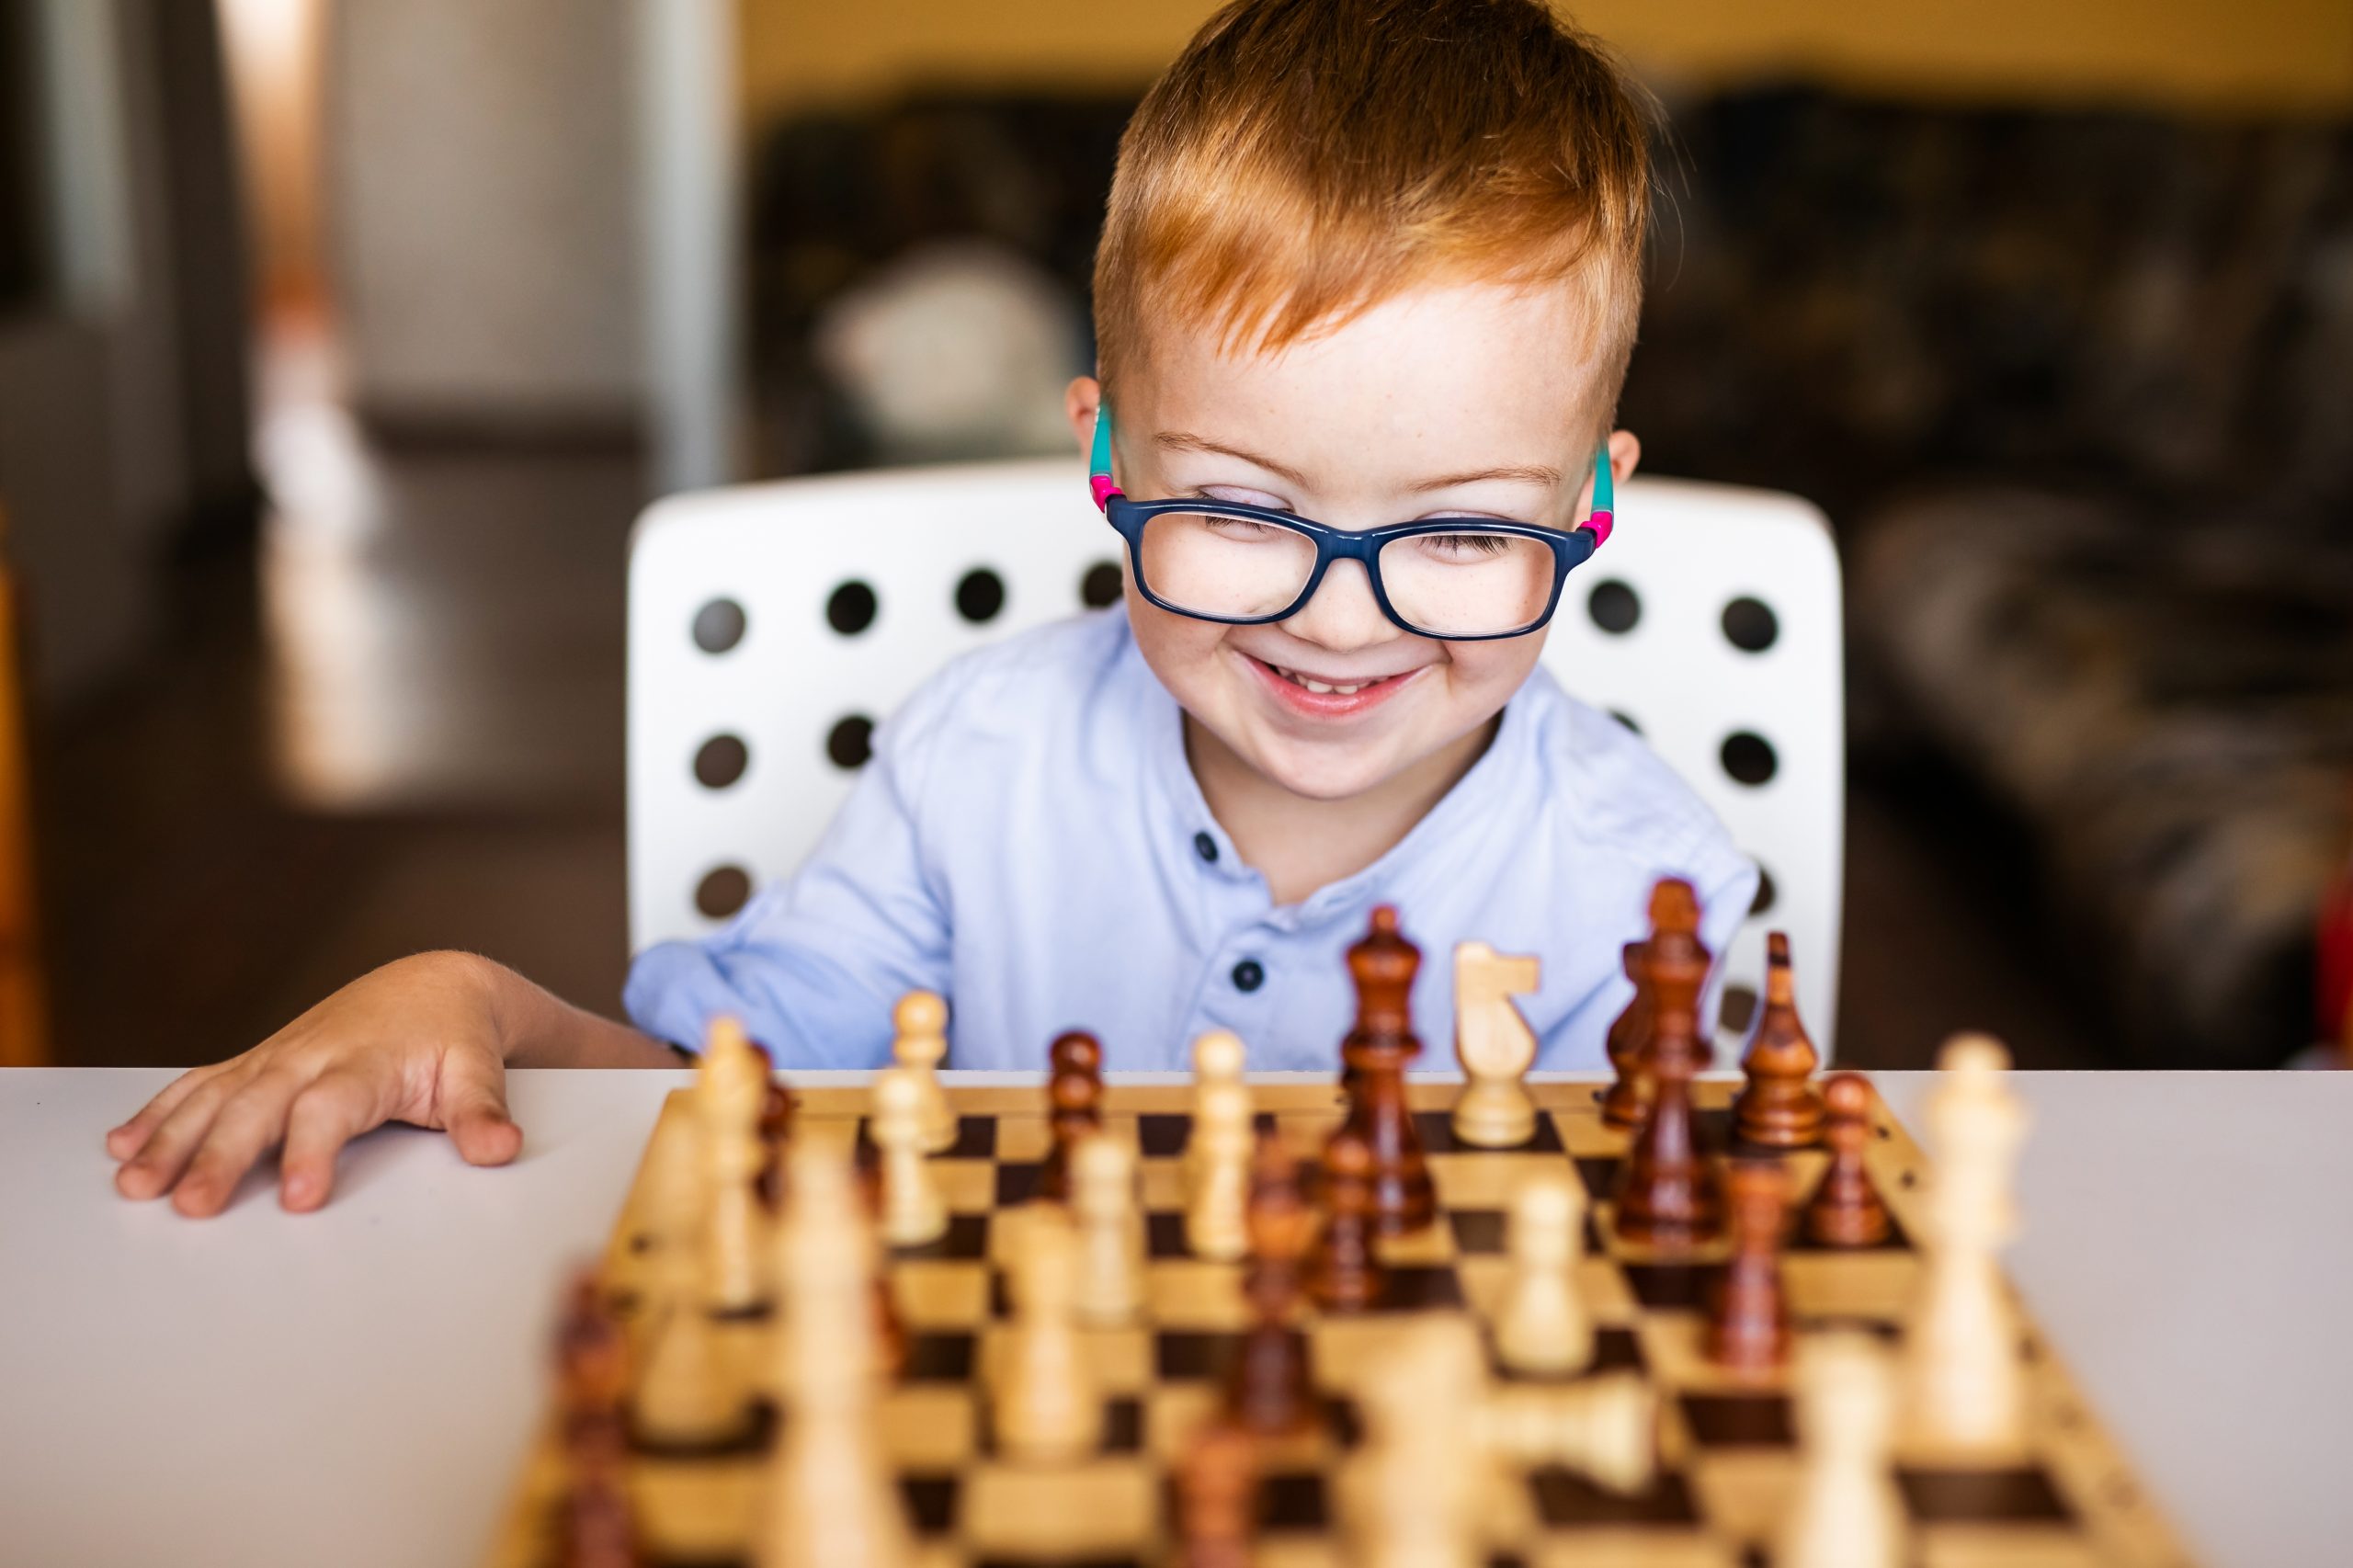 Toddler boy with down syndrome with big blue glasses playing chess in kindergarten